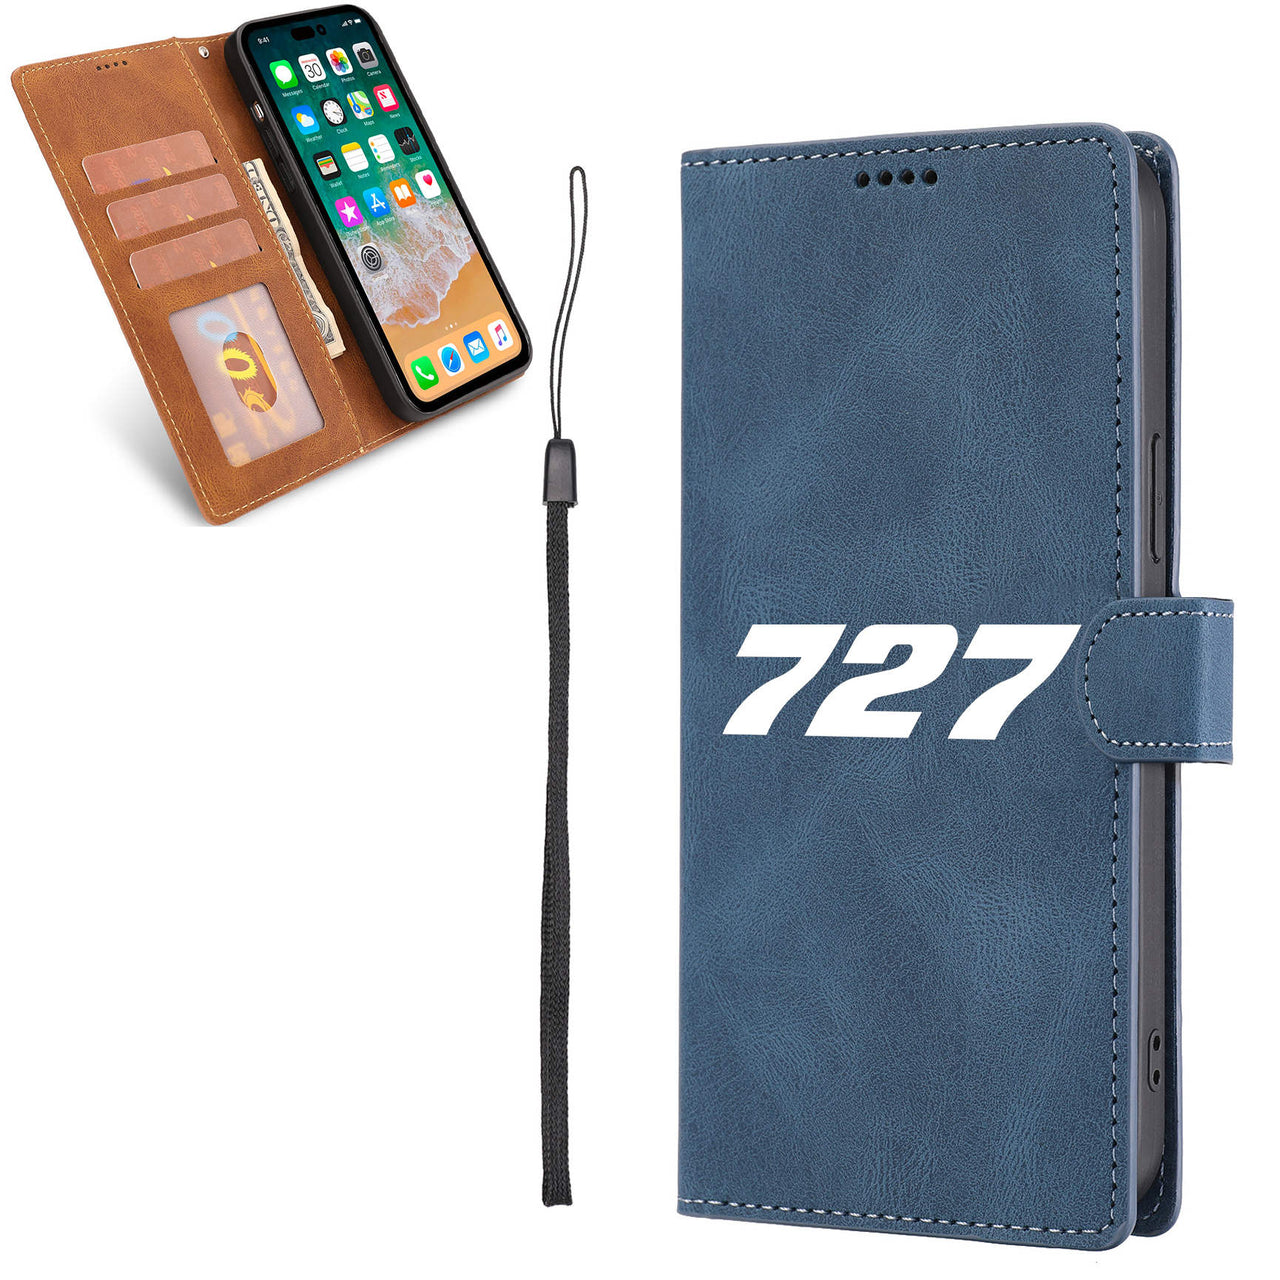 727 Flat Text Designed Leather iPhone Cases